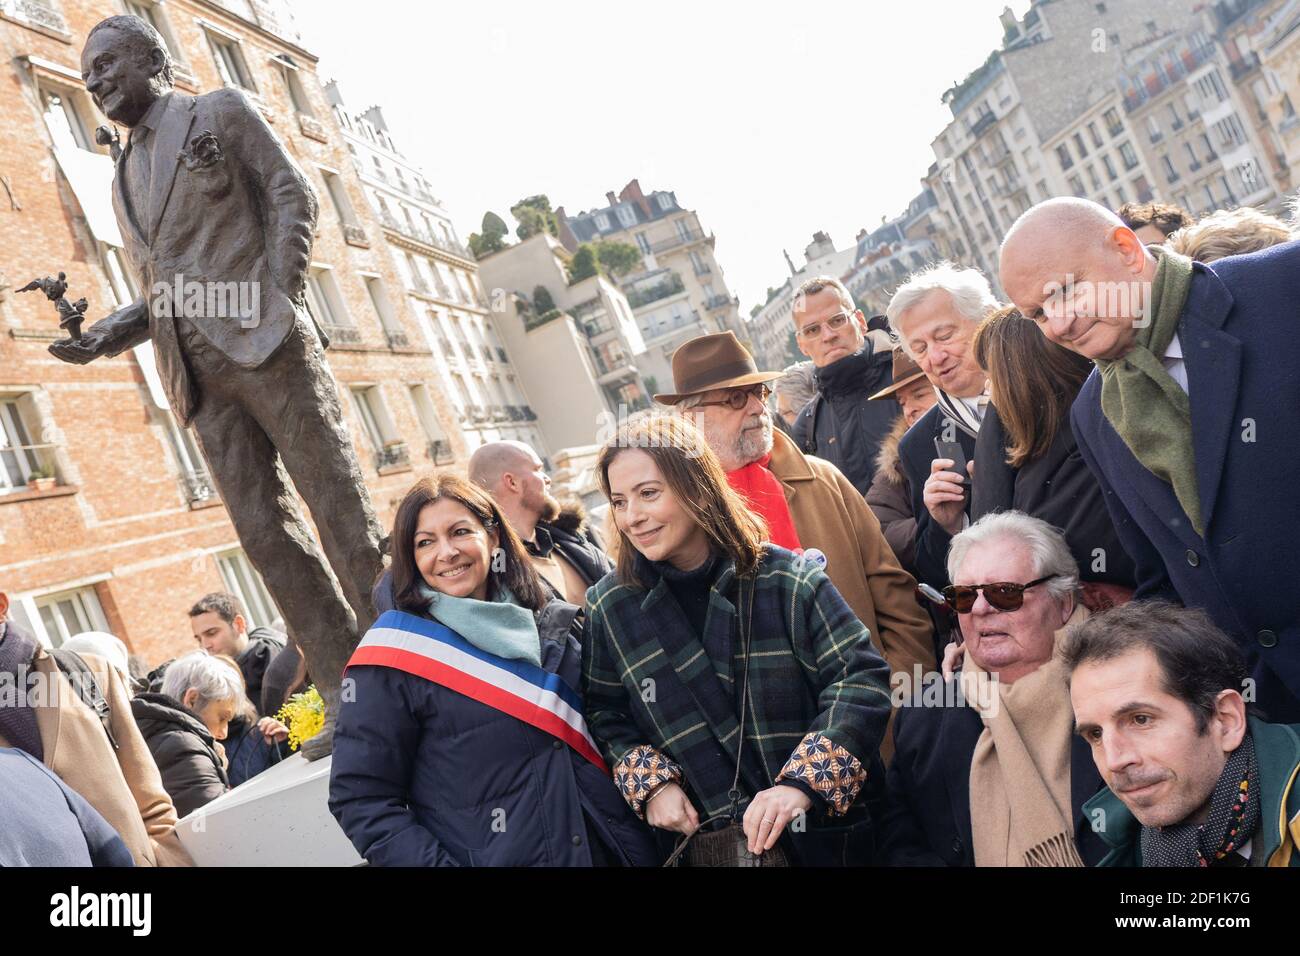 Anne Hidalgo (L), Mayor of Paris, Anne Gosciny (2L), Renés Gosciny's daughter, Jean-Jacques Sempé (3L), illustrator of the Little Nicholas, Christophe Girard, Deputy Mayor of Paris for culutre (2R) and Jul (R), scriptwriter of Lucky Luke during the unveiling of a statue of Rene Goscinny in Paris, France on January 23, 2020. Photo by Florent Bardos/ABACAPRESS.COM Stock Photo